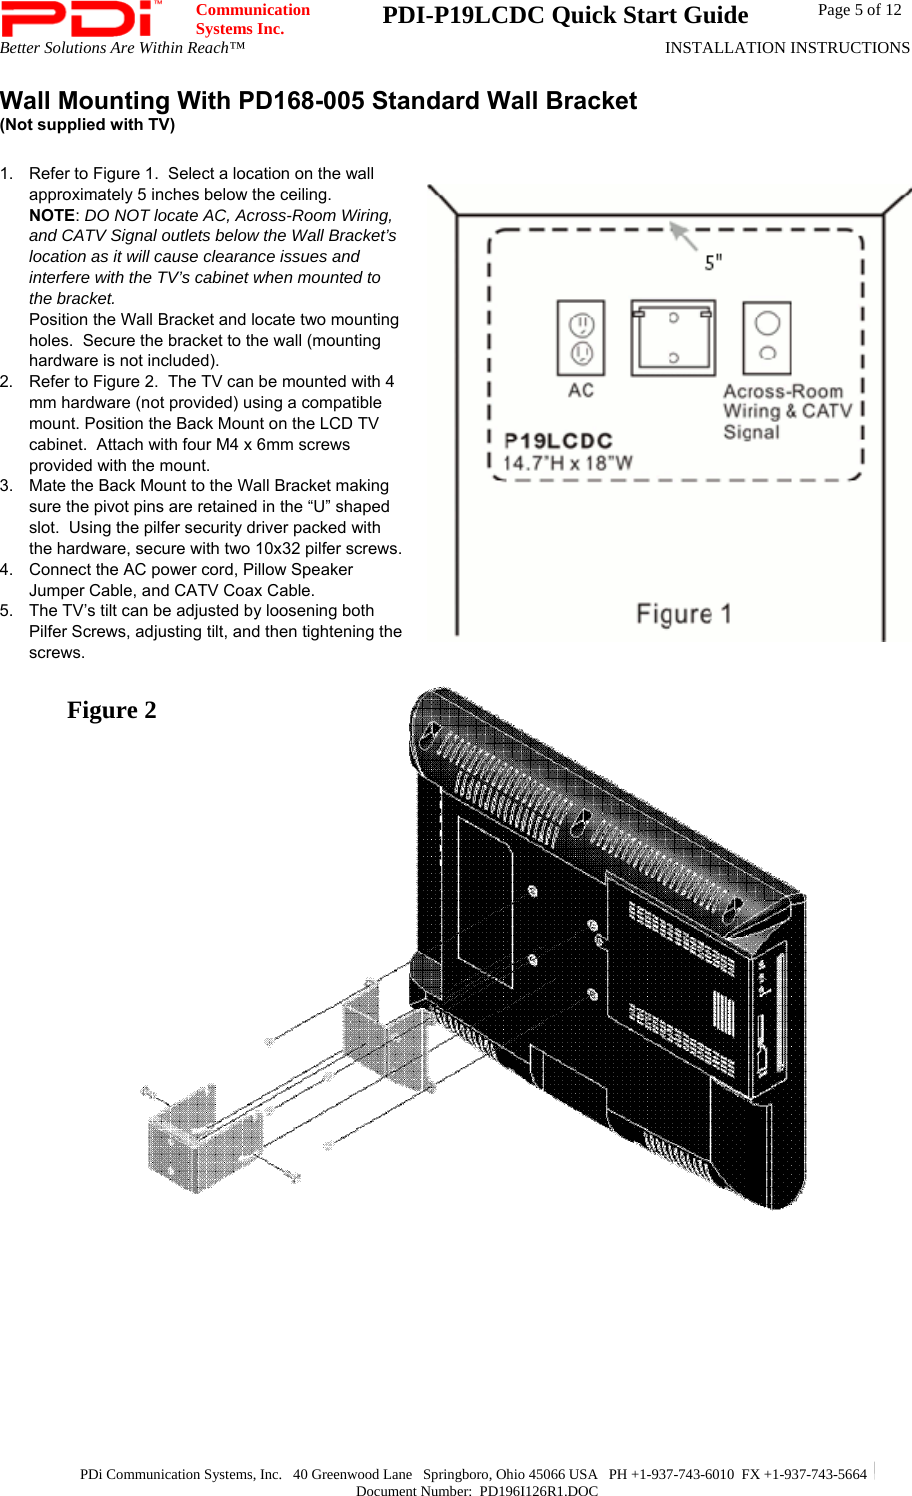  Communication  Systems Inc.  PDI-P19LCDC Quick Start Guide  Page 5 of 12 Better Solutions Are Within Reach™  INSTALLATION INSTRUCTIONS  PDi Communication Systems, Inc.   40 Greenwood Lane   Springboro, Ohio 45066 USA   PH +1-937-743-6010  FX +1-937-743-5664   Document Number:  PD196I126R1.DOC Wall Mounting With PD168-005 Standard Wall Bracket  (Not supplied with TV)   1.  Refer to Figure 1.  Select a location on the wall approximately 5 inches below the ceiling.   NOTE: DO NOT locate AC, Across-Room Wiring, and CATV Signal outlets below the Wall Bracket’s location as it will cause clearance issues and interfere with the TV’s cabinet when mounted to the bracket.   Position the Wall Bracket and locate two mounting holes.  Secure the bracket to the wall (mounting hardware is not included).   2.  Refer to Figure 2.  The TV can be mounted with 4 mm hardware (not provided) using a compatible mount. Position the Back Mount on the LCD TV cabinet.  Attach with four M4 x 6mm screws provided with the mount. 3.  Mate the Back Mount to the Wall Bracket making sure the pivot pins are retained in the “U” shaped slot.  Using the pilfer security driver packed with the hardware, secure with two 10x32 pilfer screws. 4.  Connect the AC power cord, Pillow Speaker Jumper Cable, and CATV Coax Cable. 5.  The TV’s tilt can be adjusted by loosening both Pilfer Screws, adjusting tilt, and then tightening the screws.     Figure 2 